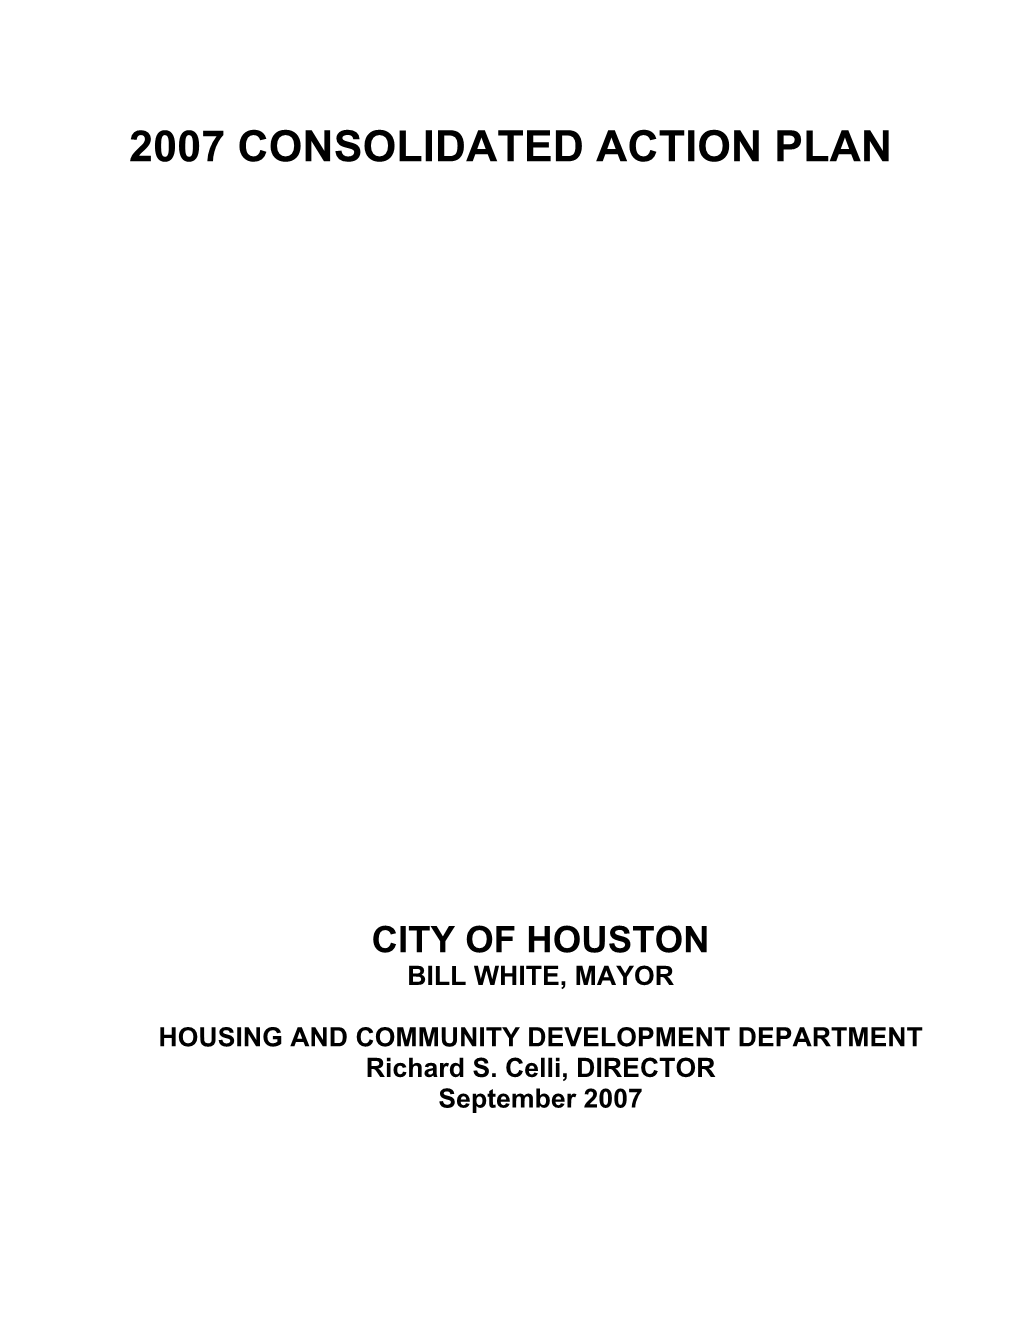 2007 Consolidated Action Plan